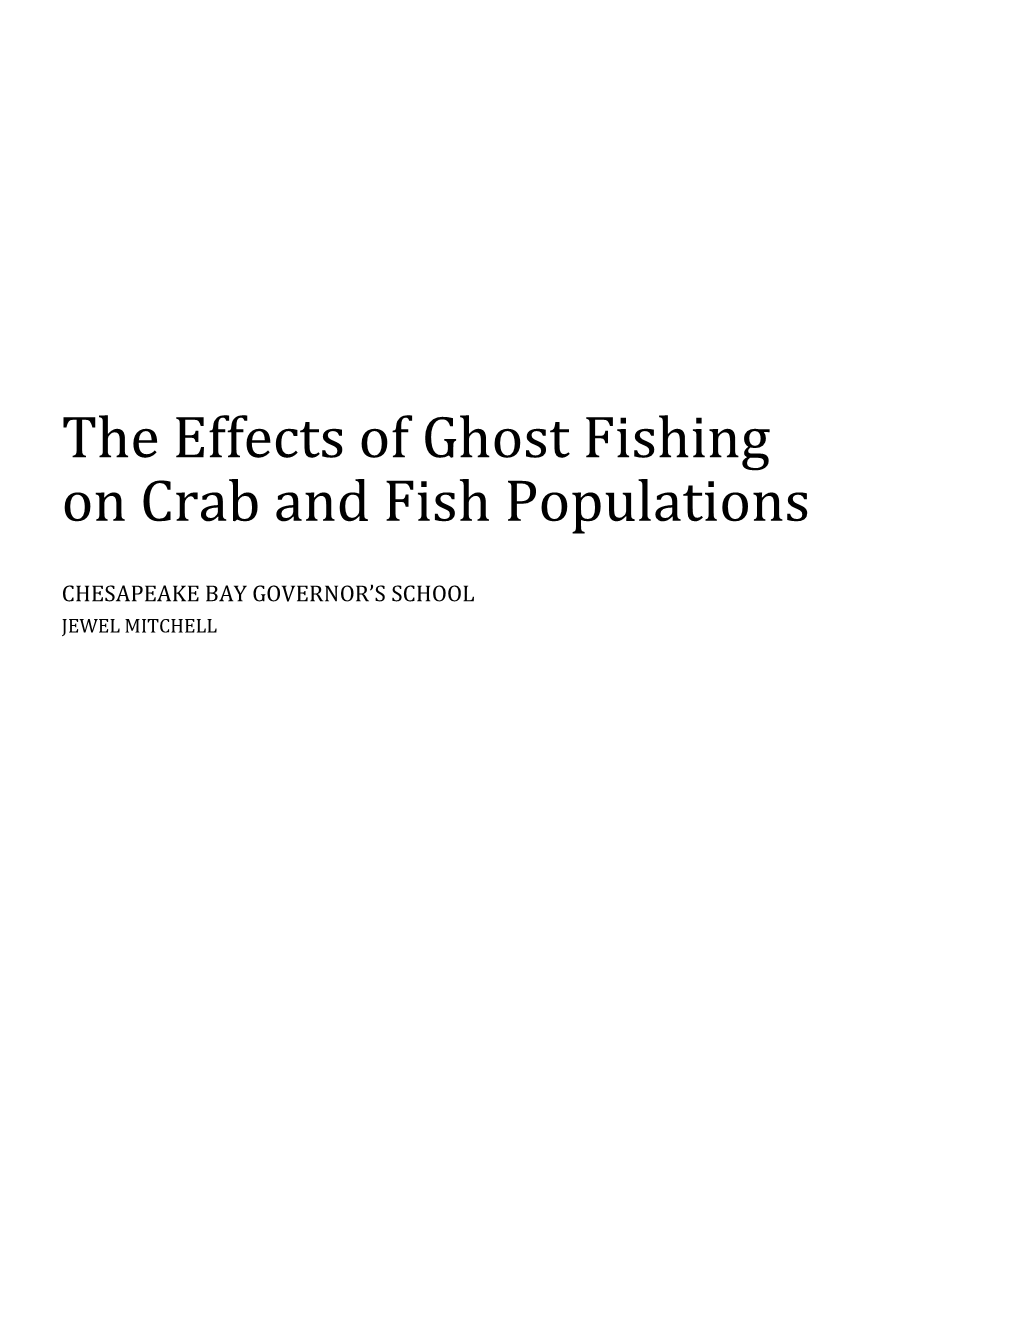 The Effects of Ghost Fishing on Crab and Fish Populations